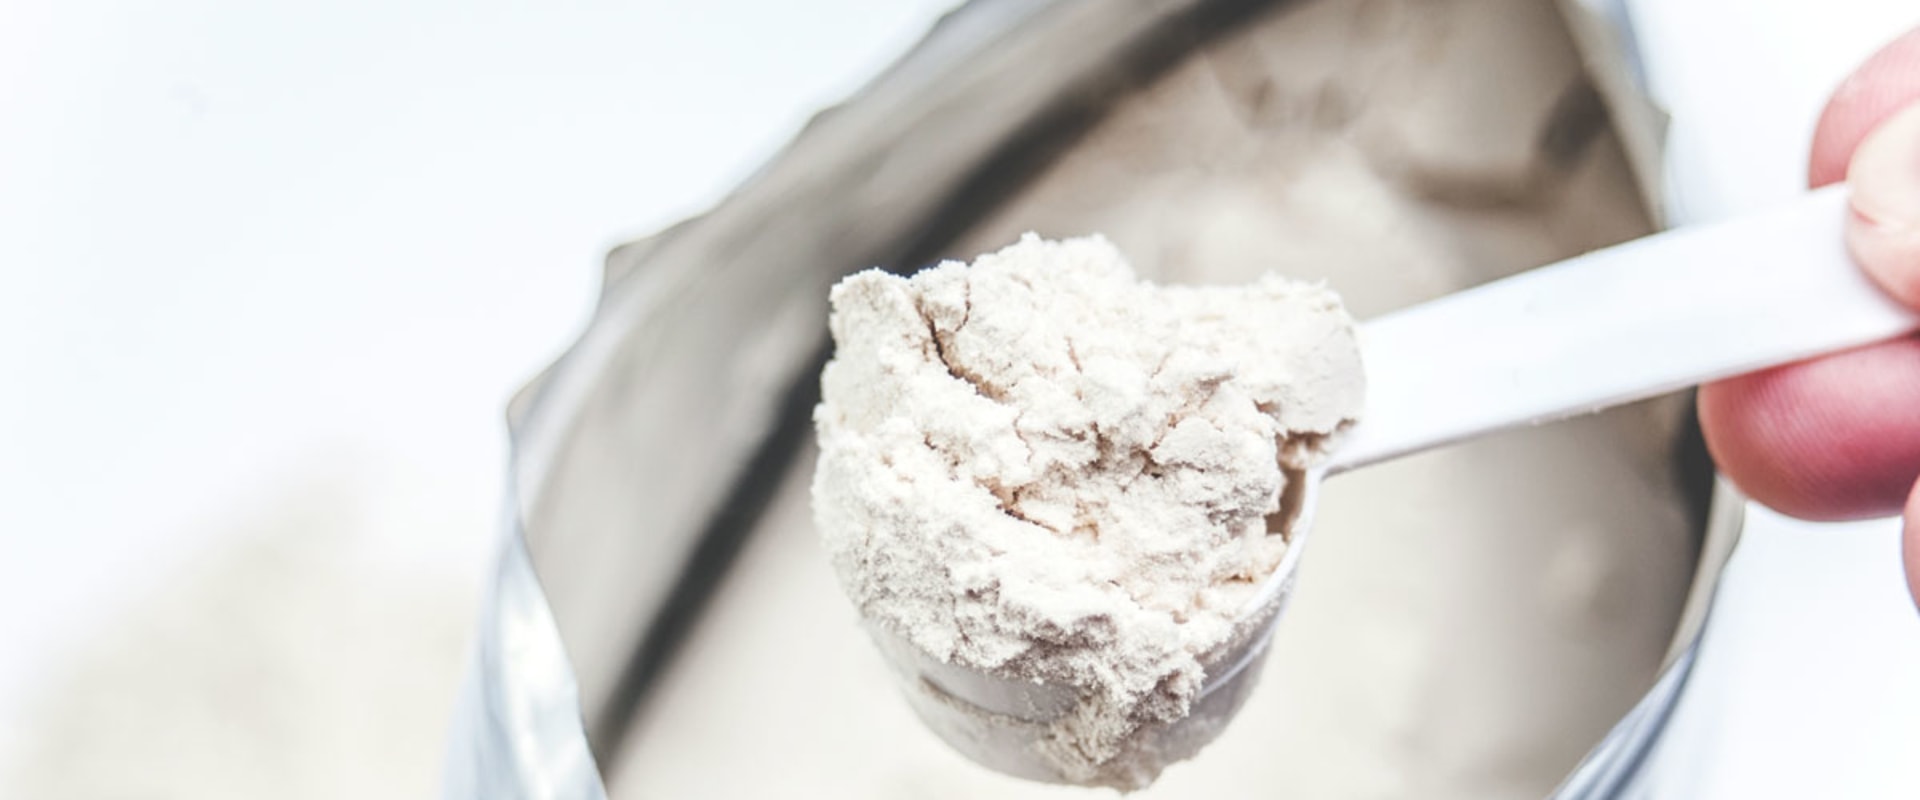 How Much Sugar Should You Include in Your Protein Powder Serving?